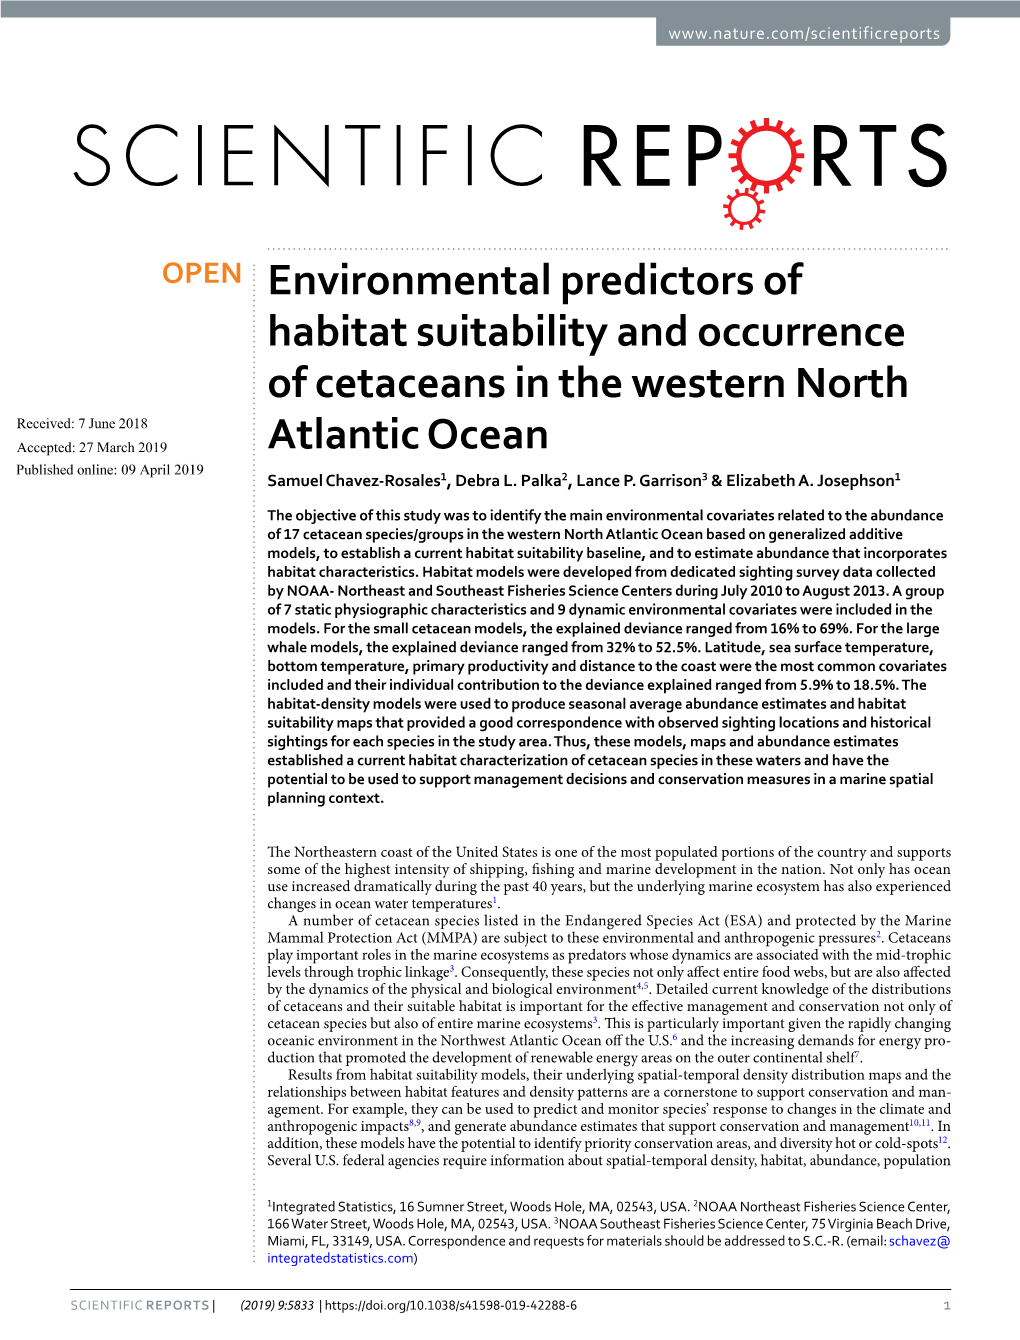 Environmental Predictors of Habitat Suitability and Occurrence Of